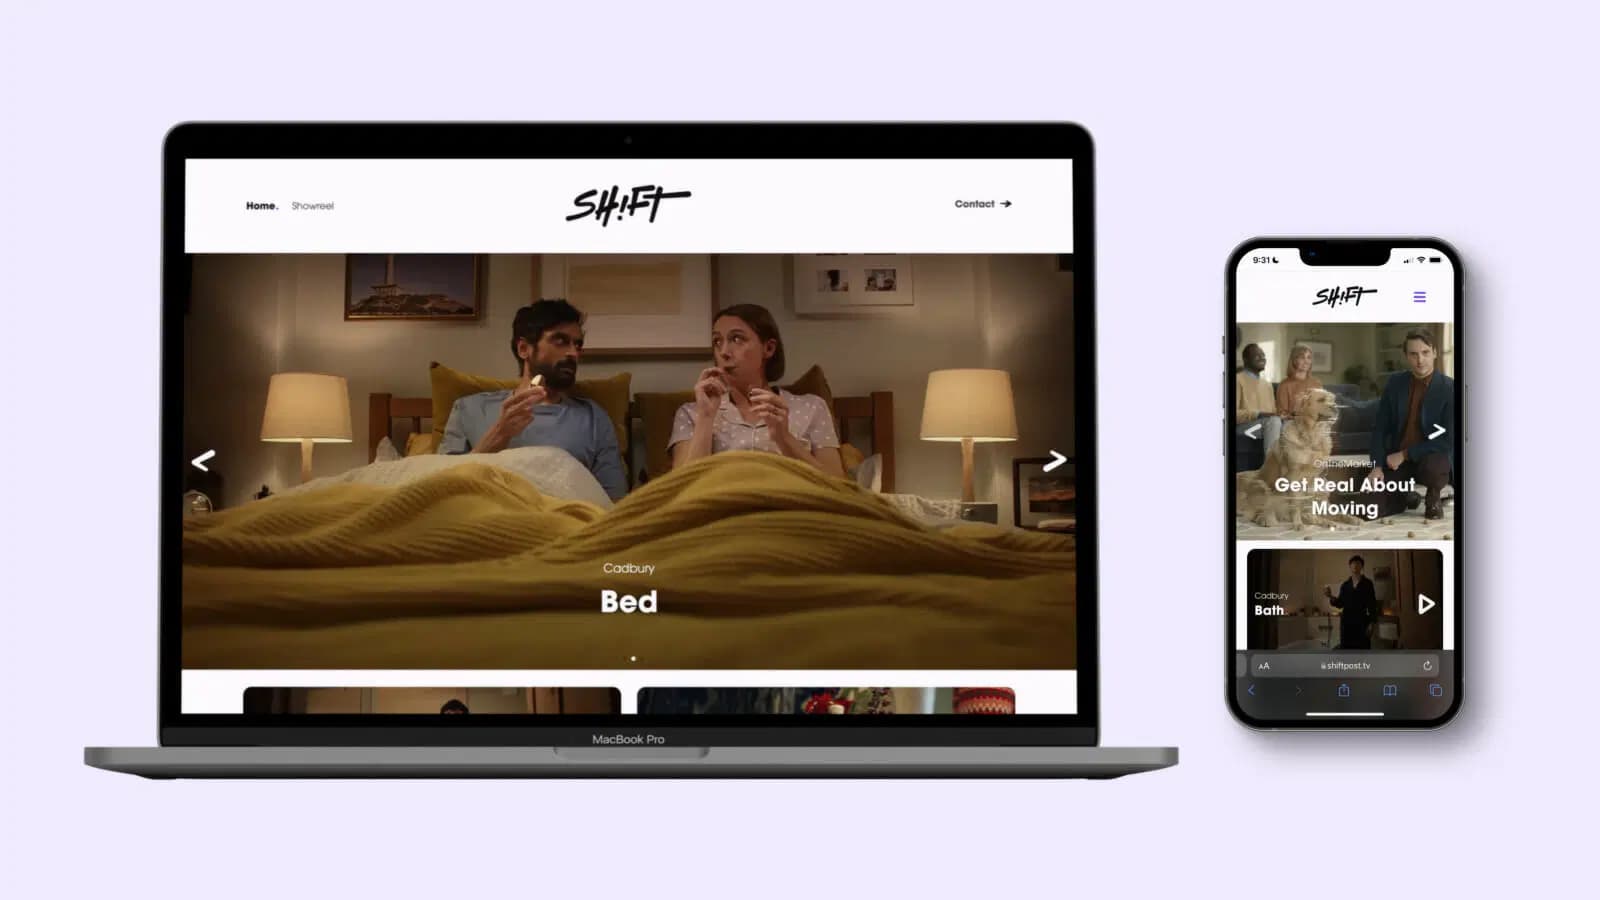 Mockup of the Shift website in a Macbook Pro frame adjacent to a mockup of the Shift website in an iPhone frame.